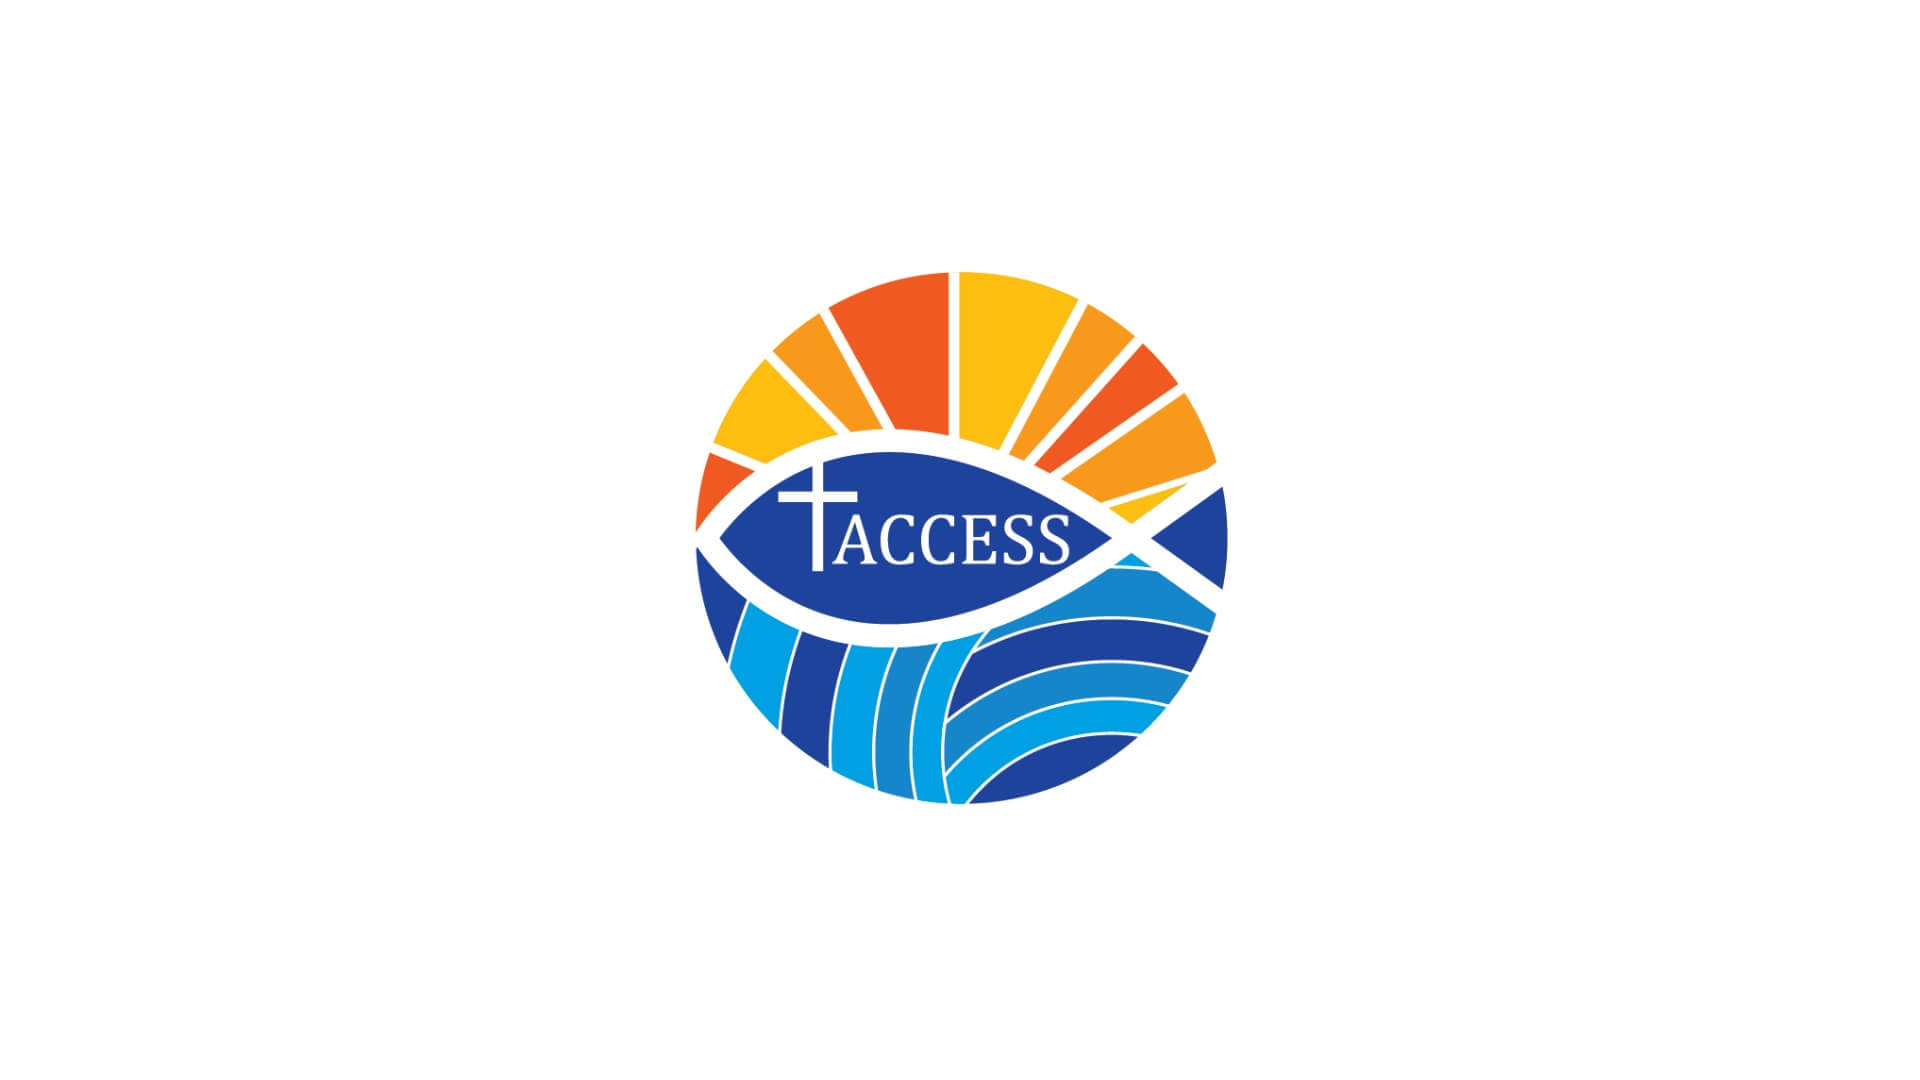 Timmins Care Logo of access, featuring stylized sun rays in orange and yellow above blue ocean waves, encircled by a white band with the word "access" overlaid. Cochrane District Social Services Administration Board